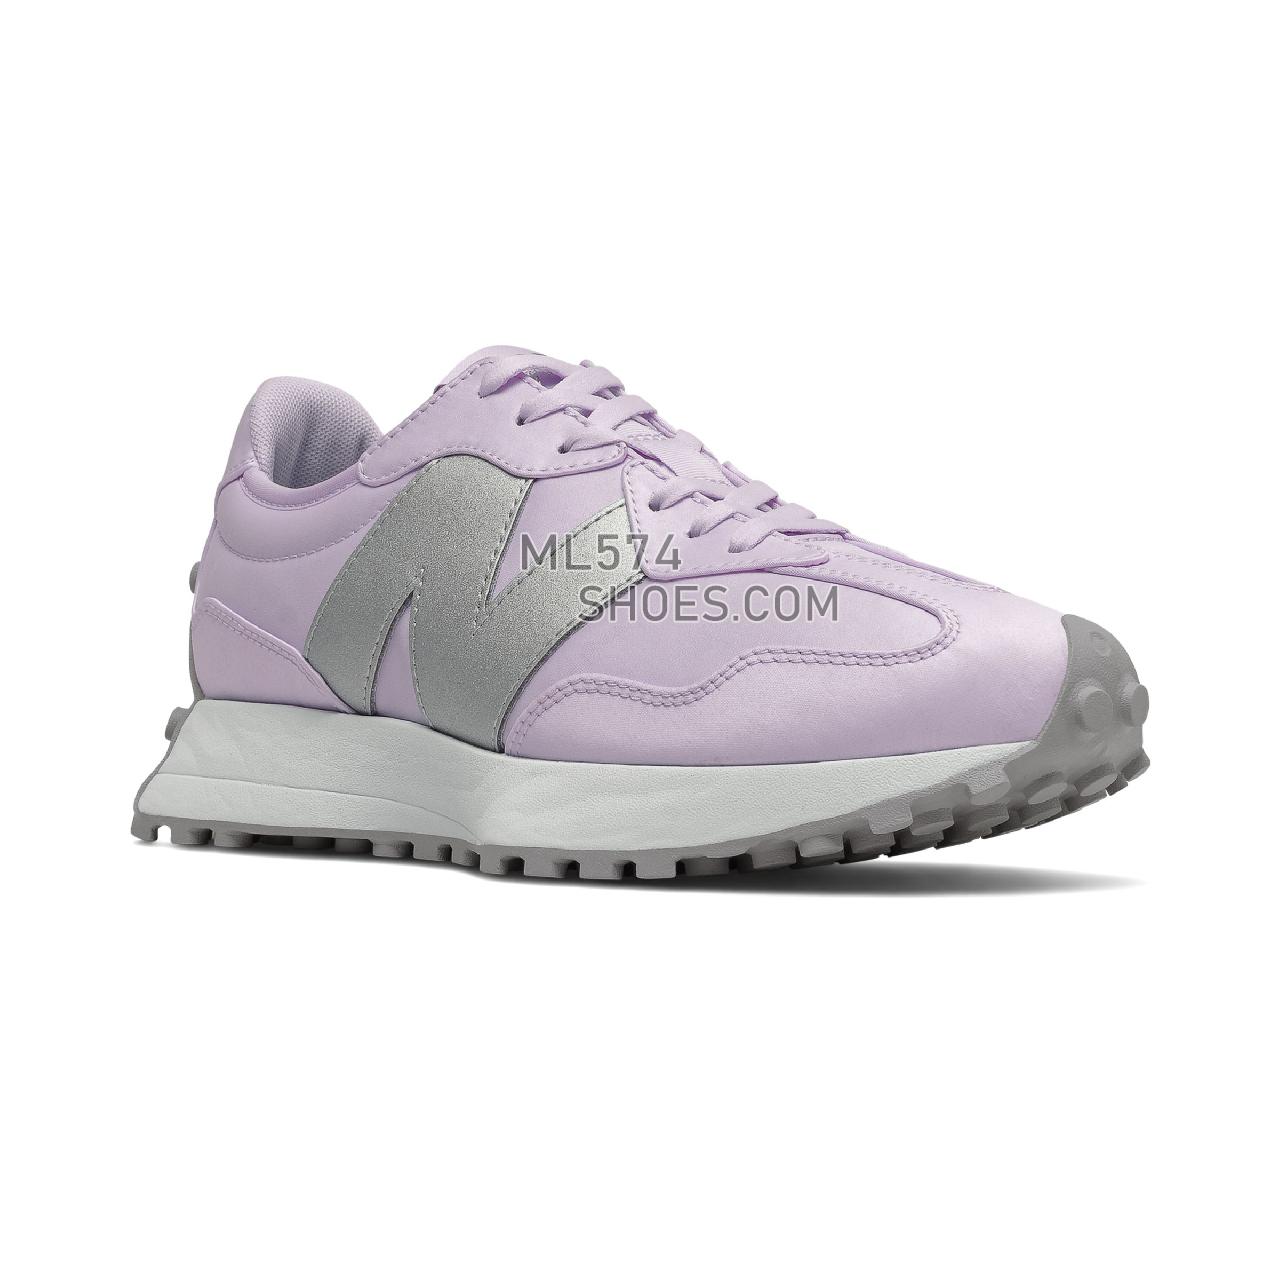 New Balance 327 - Women's Sport Style Sneakers - Astral Glow with Whisper Grey - WS327MS1